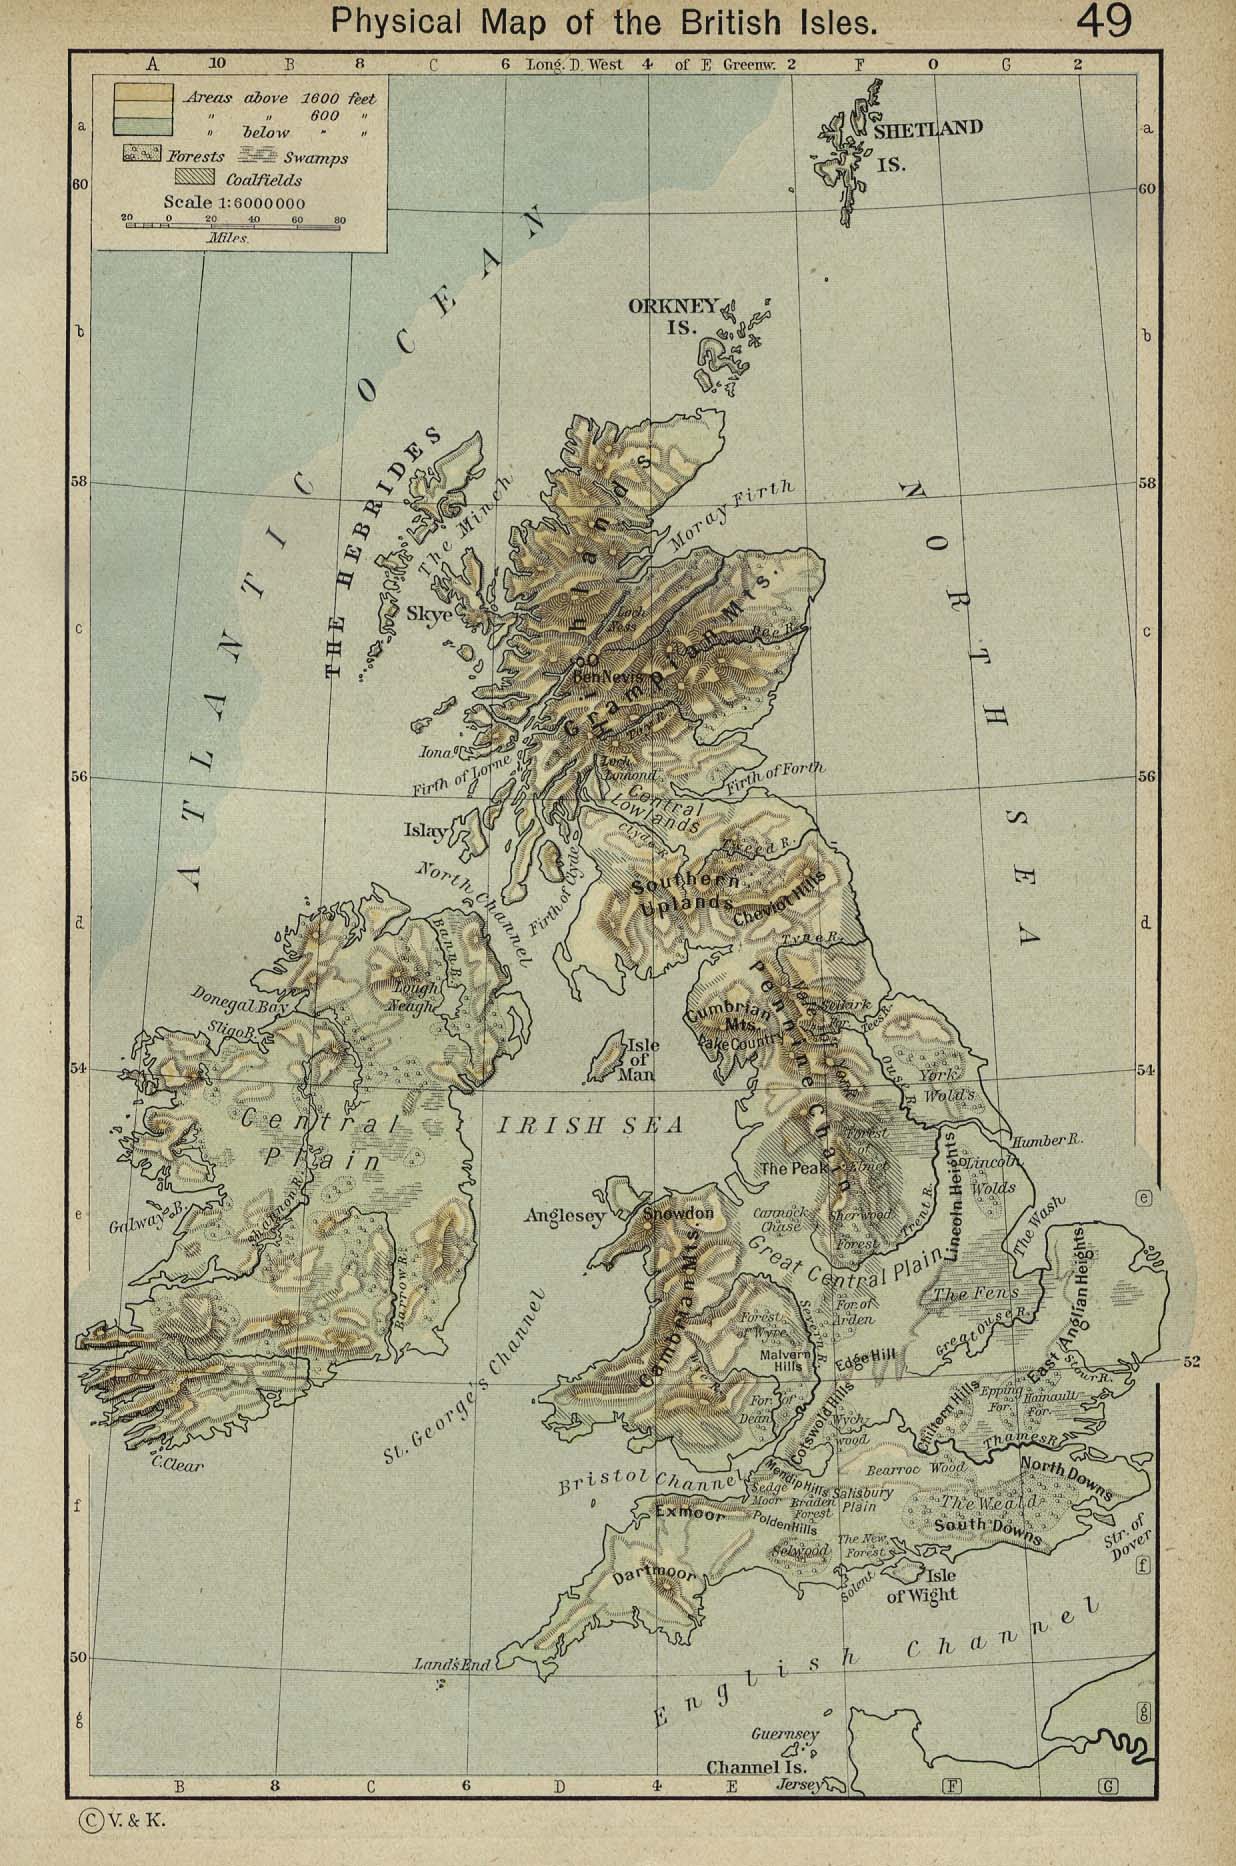 Physical Map of the British Isles